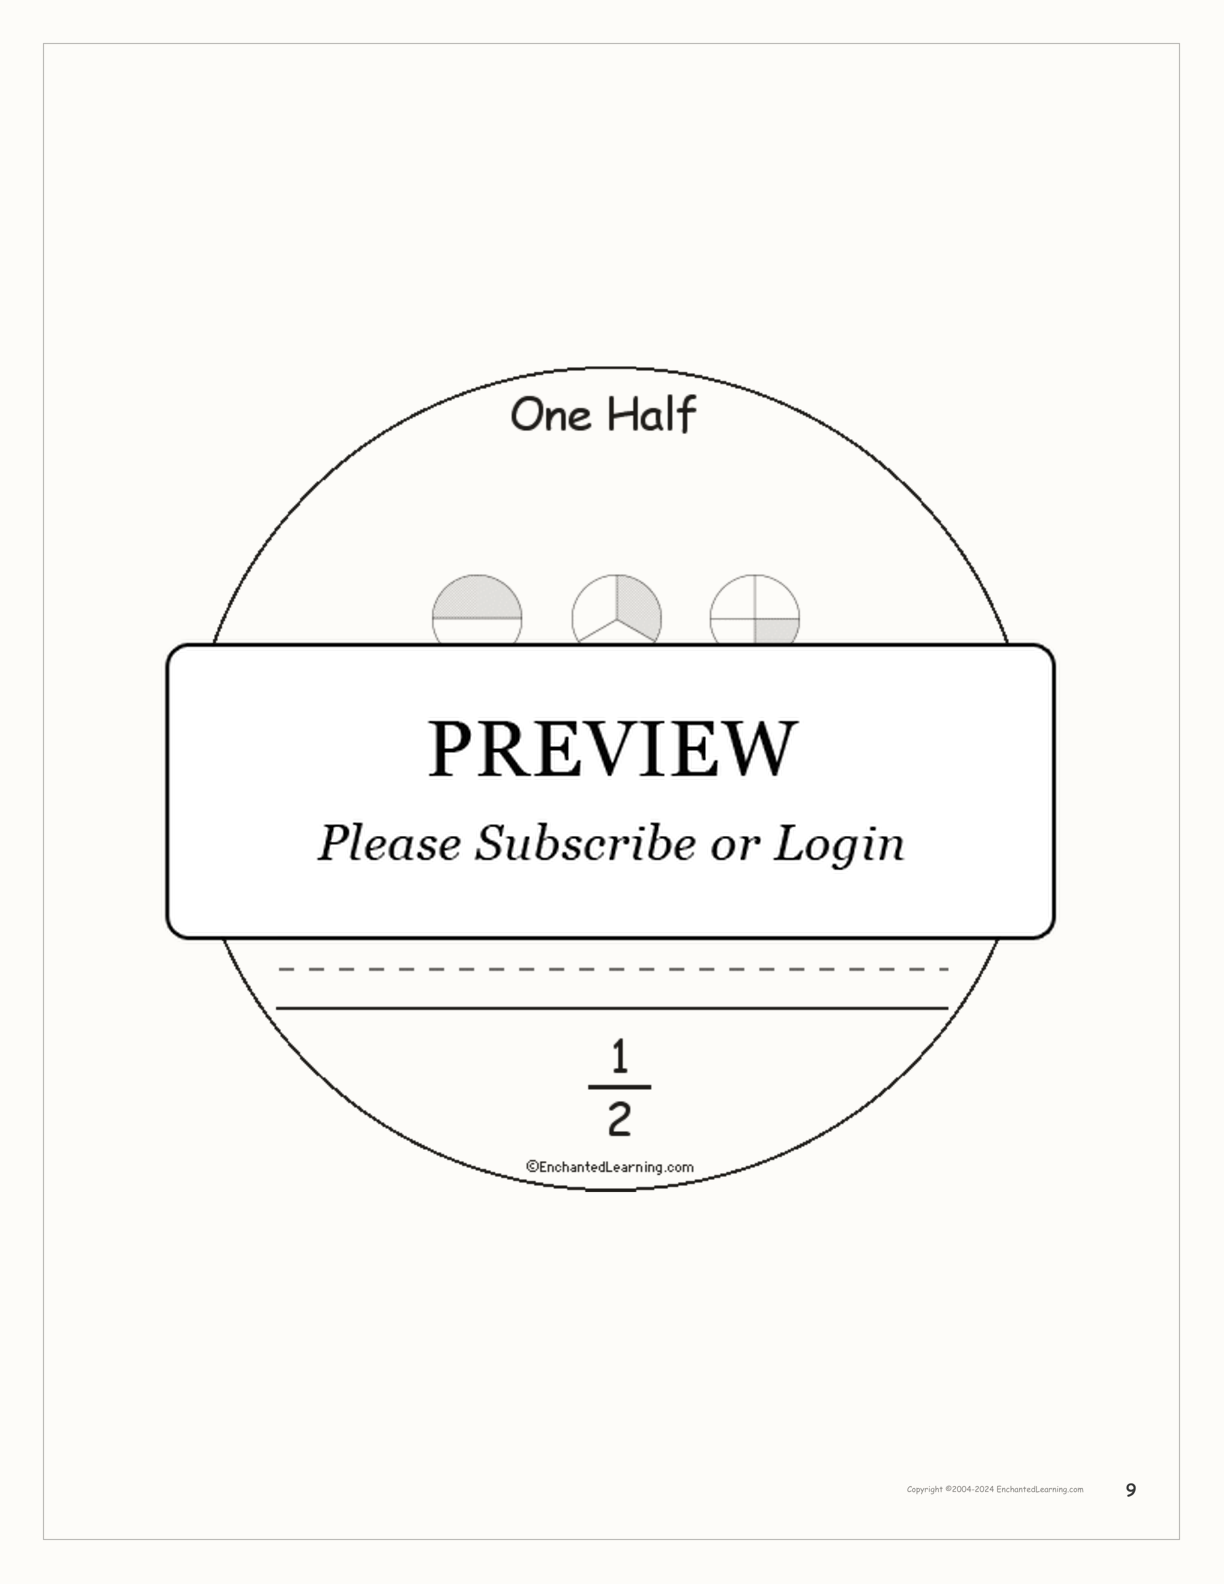 One Half: A Book on Fractions interactive printout page 9